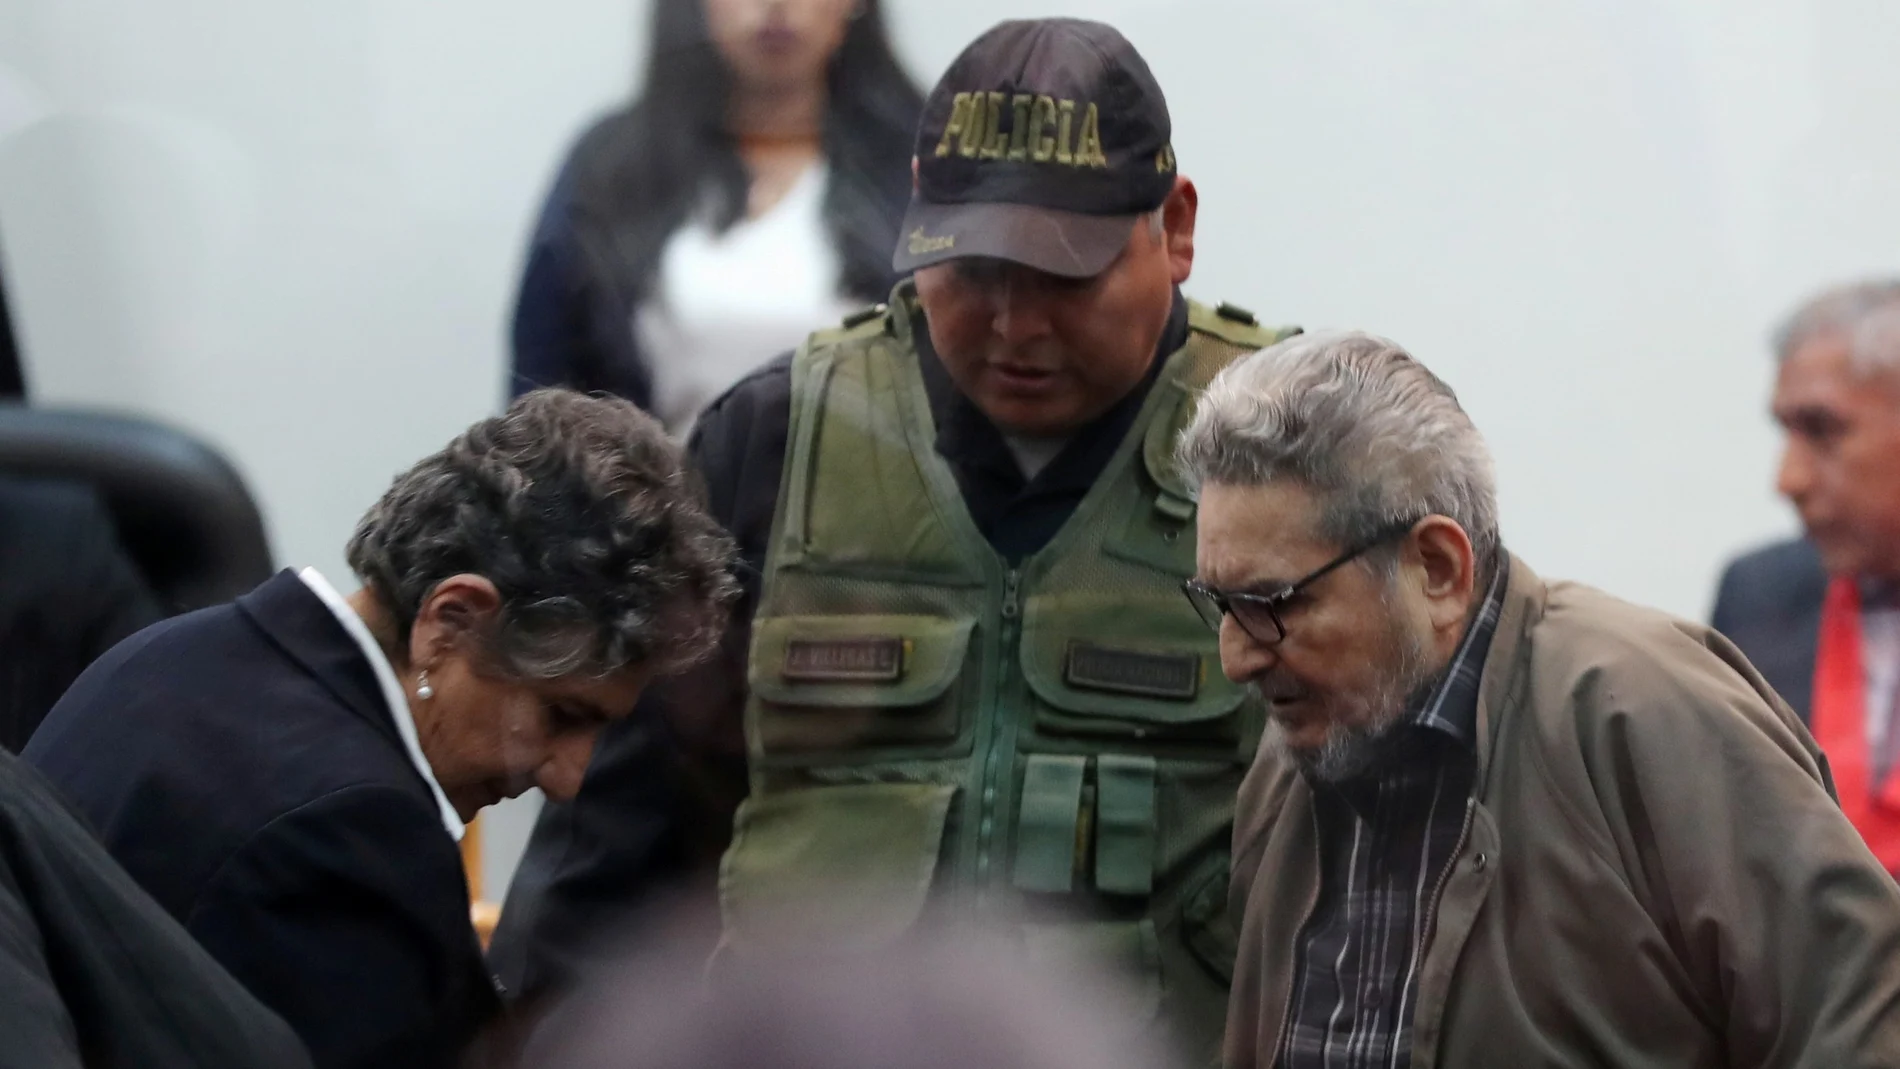 FILE PHOTO: Shining Path founder Abimael Guzman and his wife and second leader Elena Iparraguirre attend a trial during sentence of a 1992 Shining Path car bomb case in Miraflores, at a high security naval prison in Callao, Peru September 11, 2018. Picture taken through a window. REUTERS/Mariana Bazo/File Photo